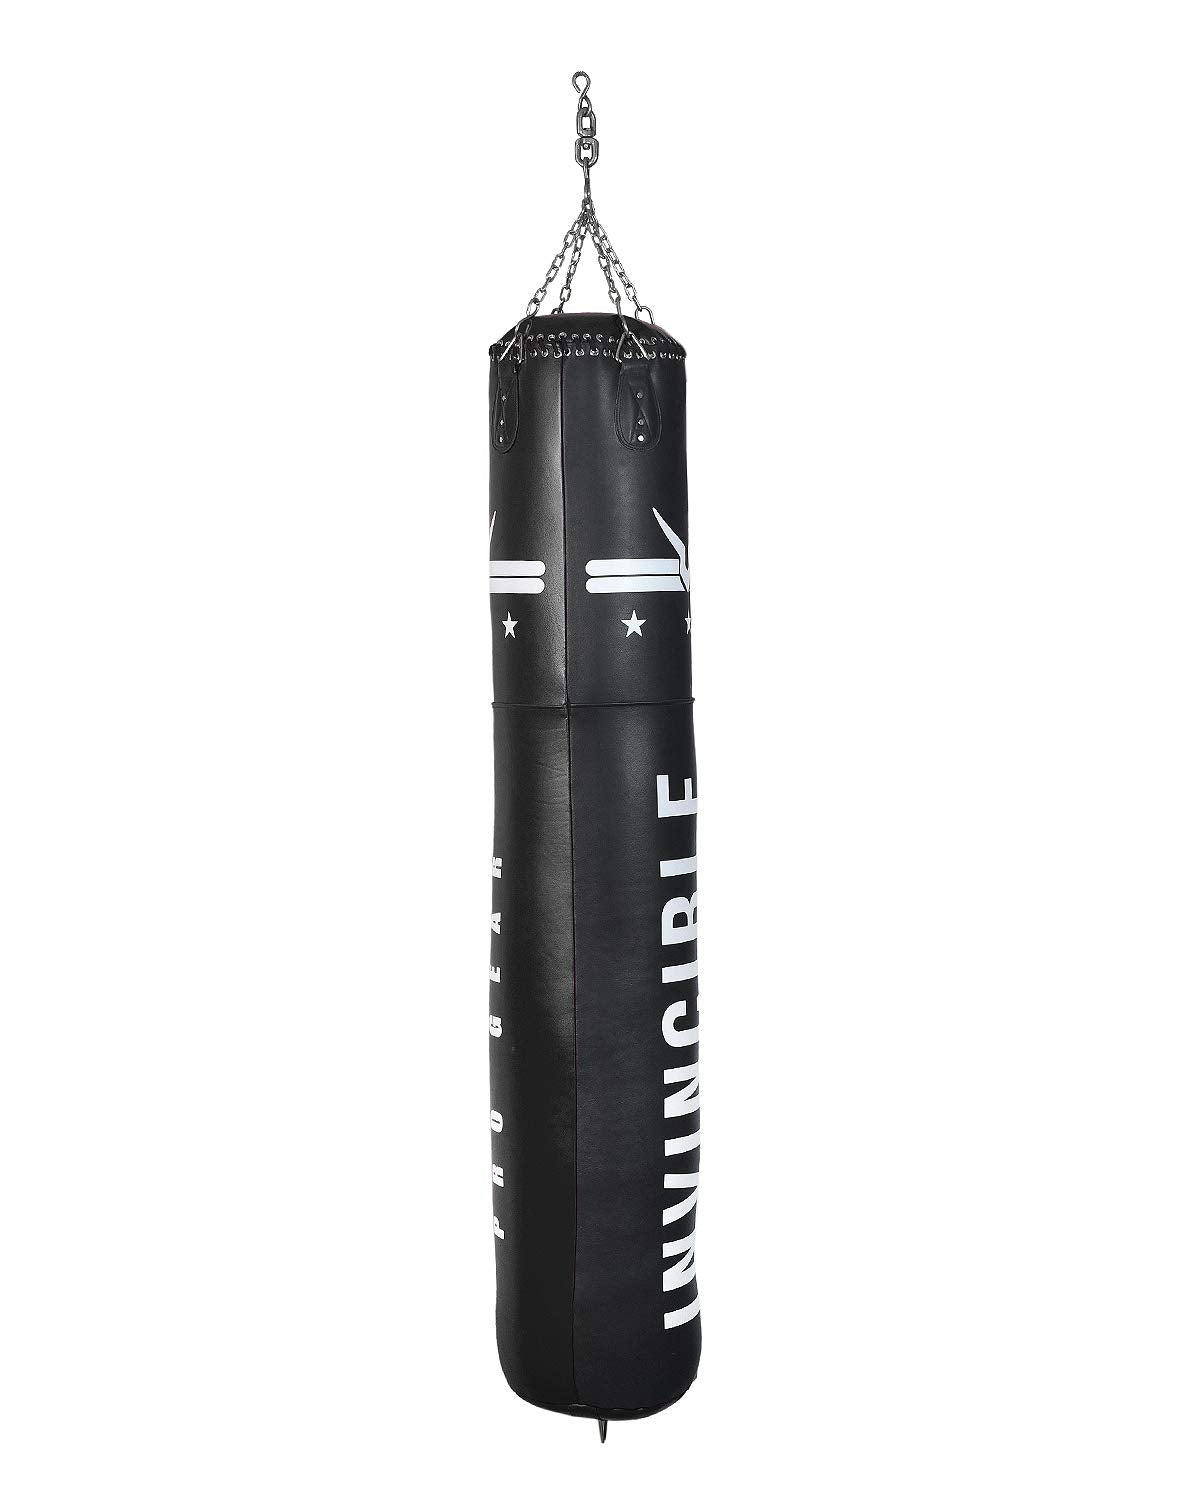 IRIS Wall Punching Bag, Boxing Fighter Fitness Wall Punch Bag Wall Mount  Punching Bag Training Square Focus Target Soft Pad Size: Approx. 30 * 30 *  10 cm : Amazon.in: Sports, Fitness & Outdoors